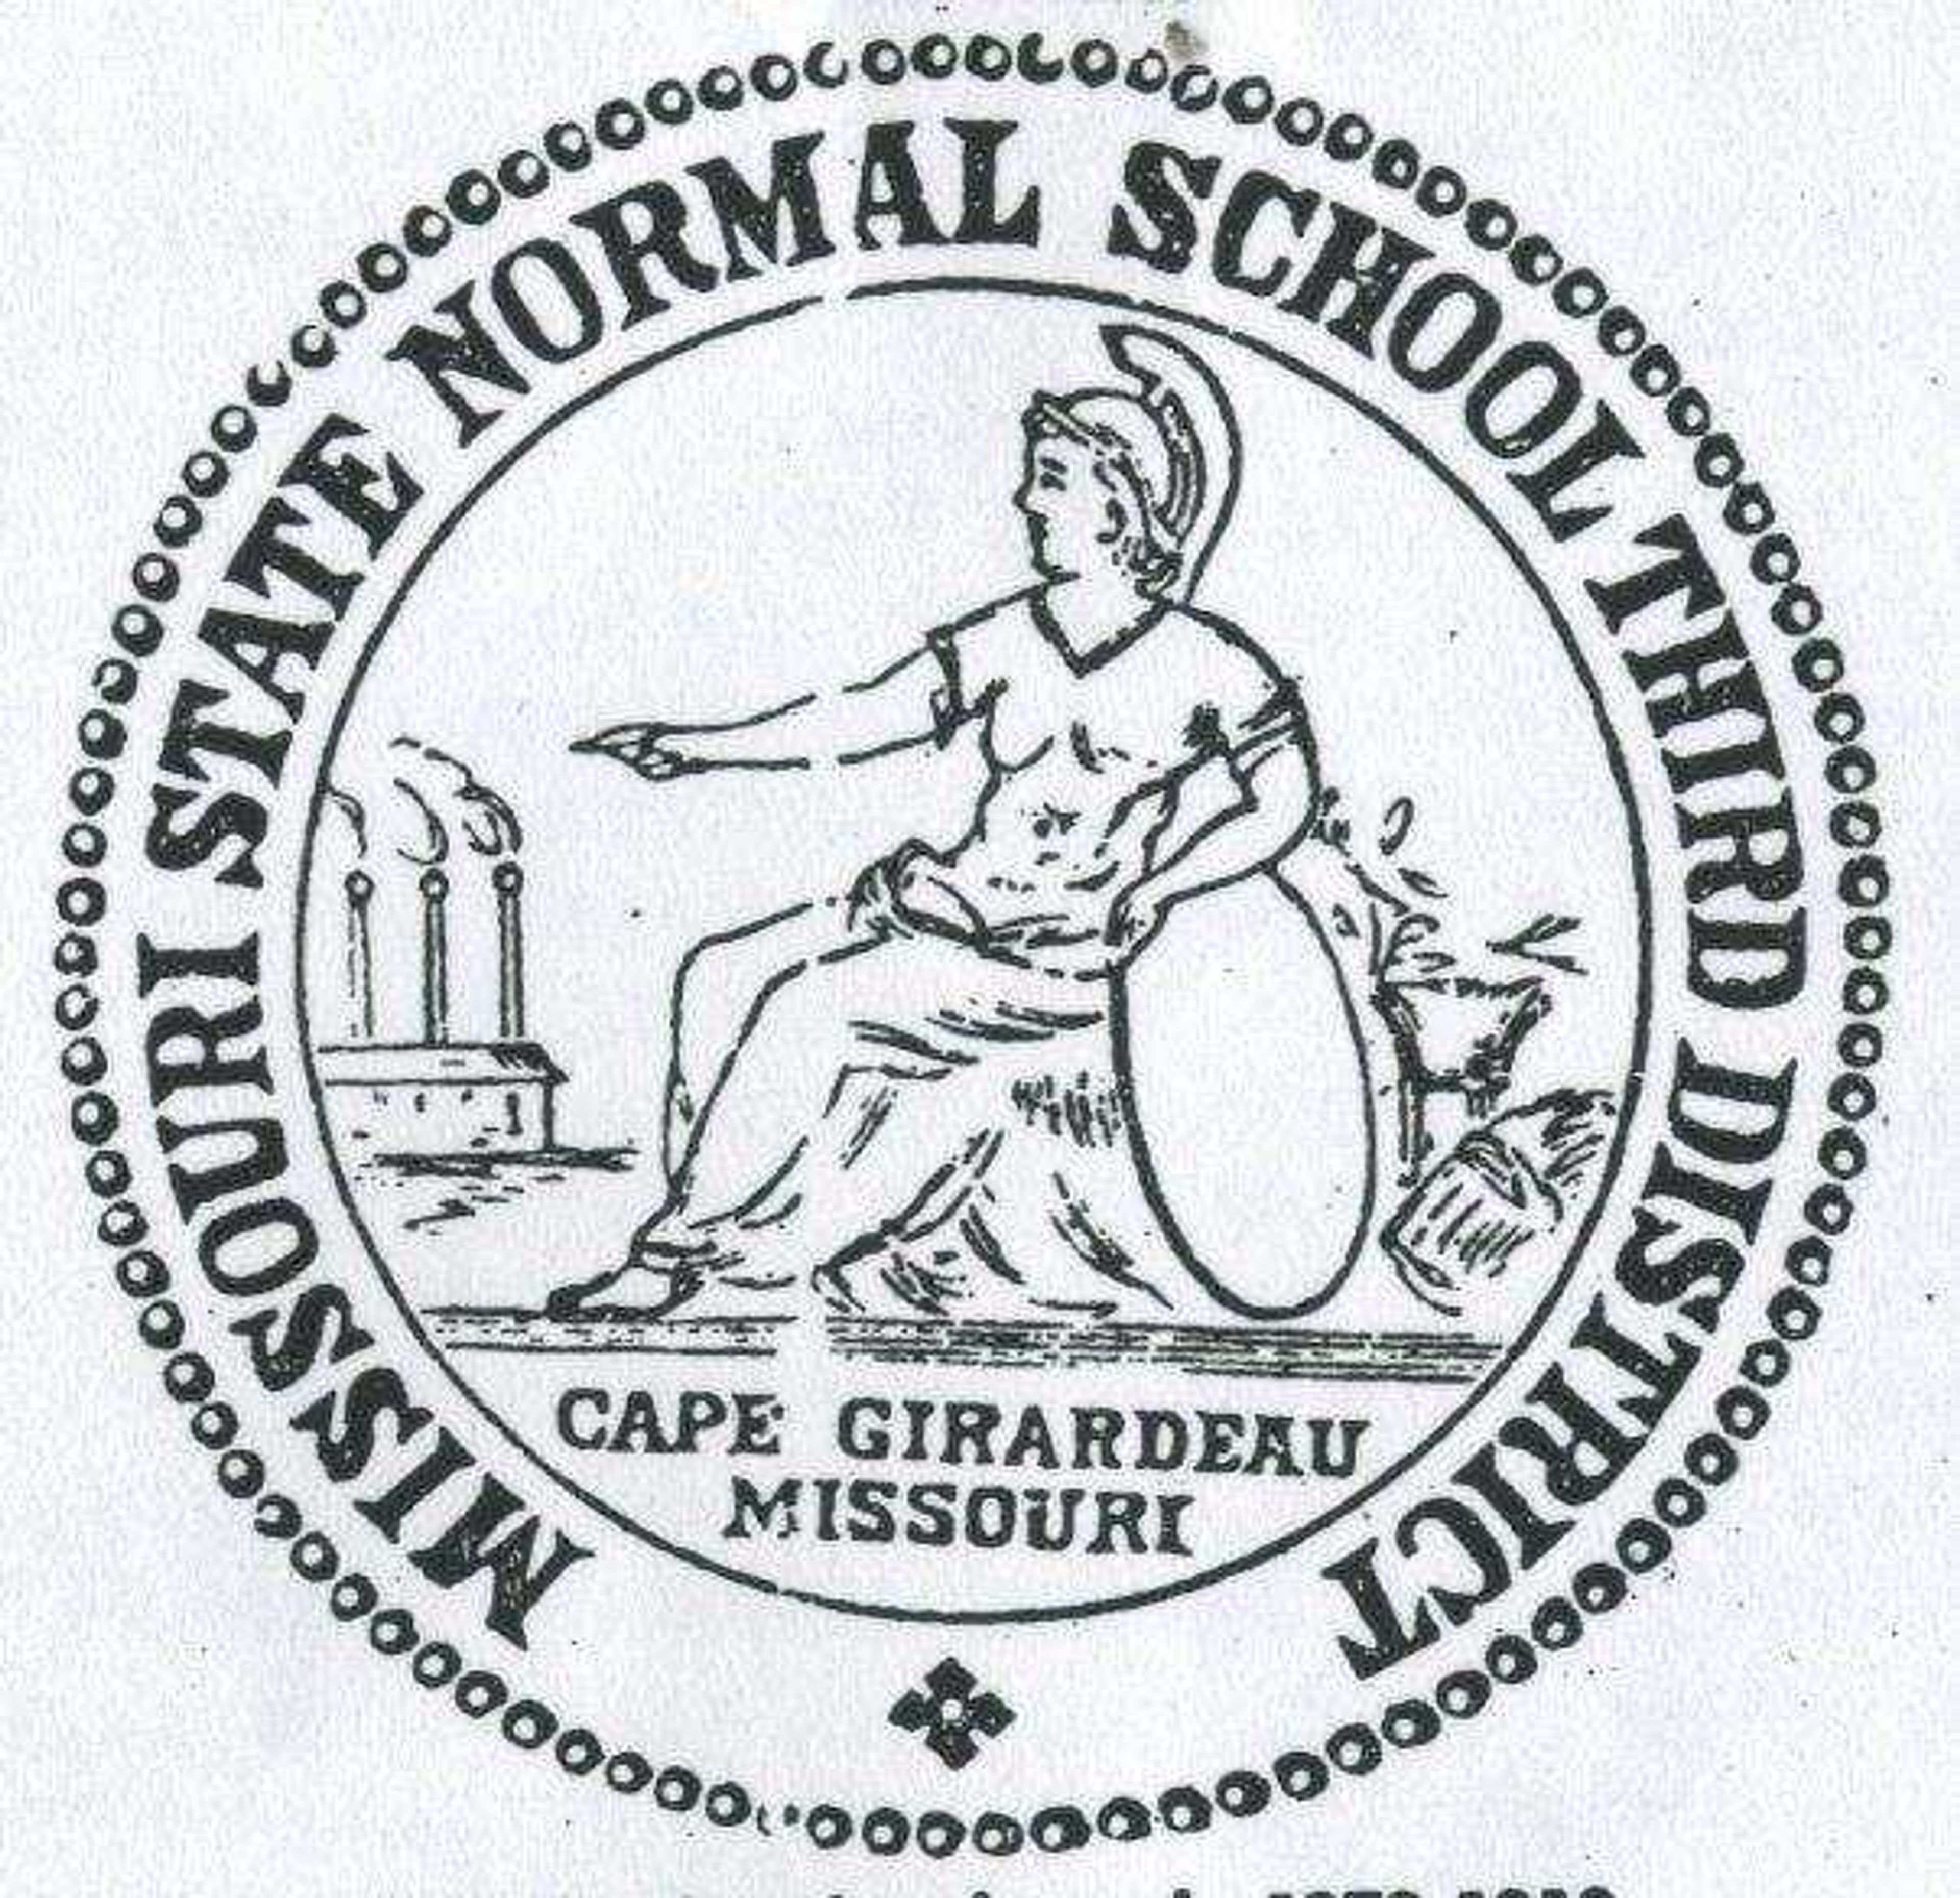 The Missouri State Normal School logo, used between 1873 and 1918. University logo